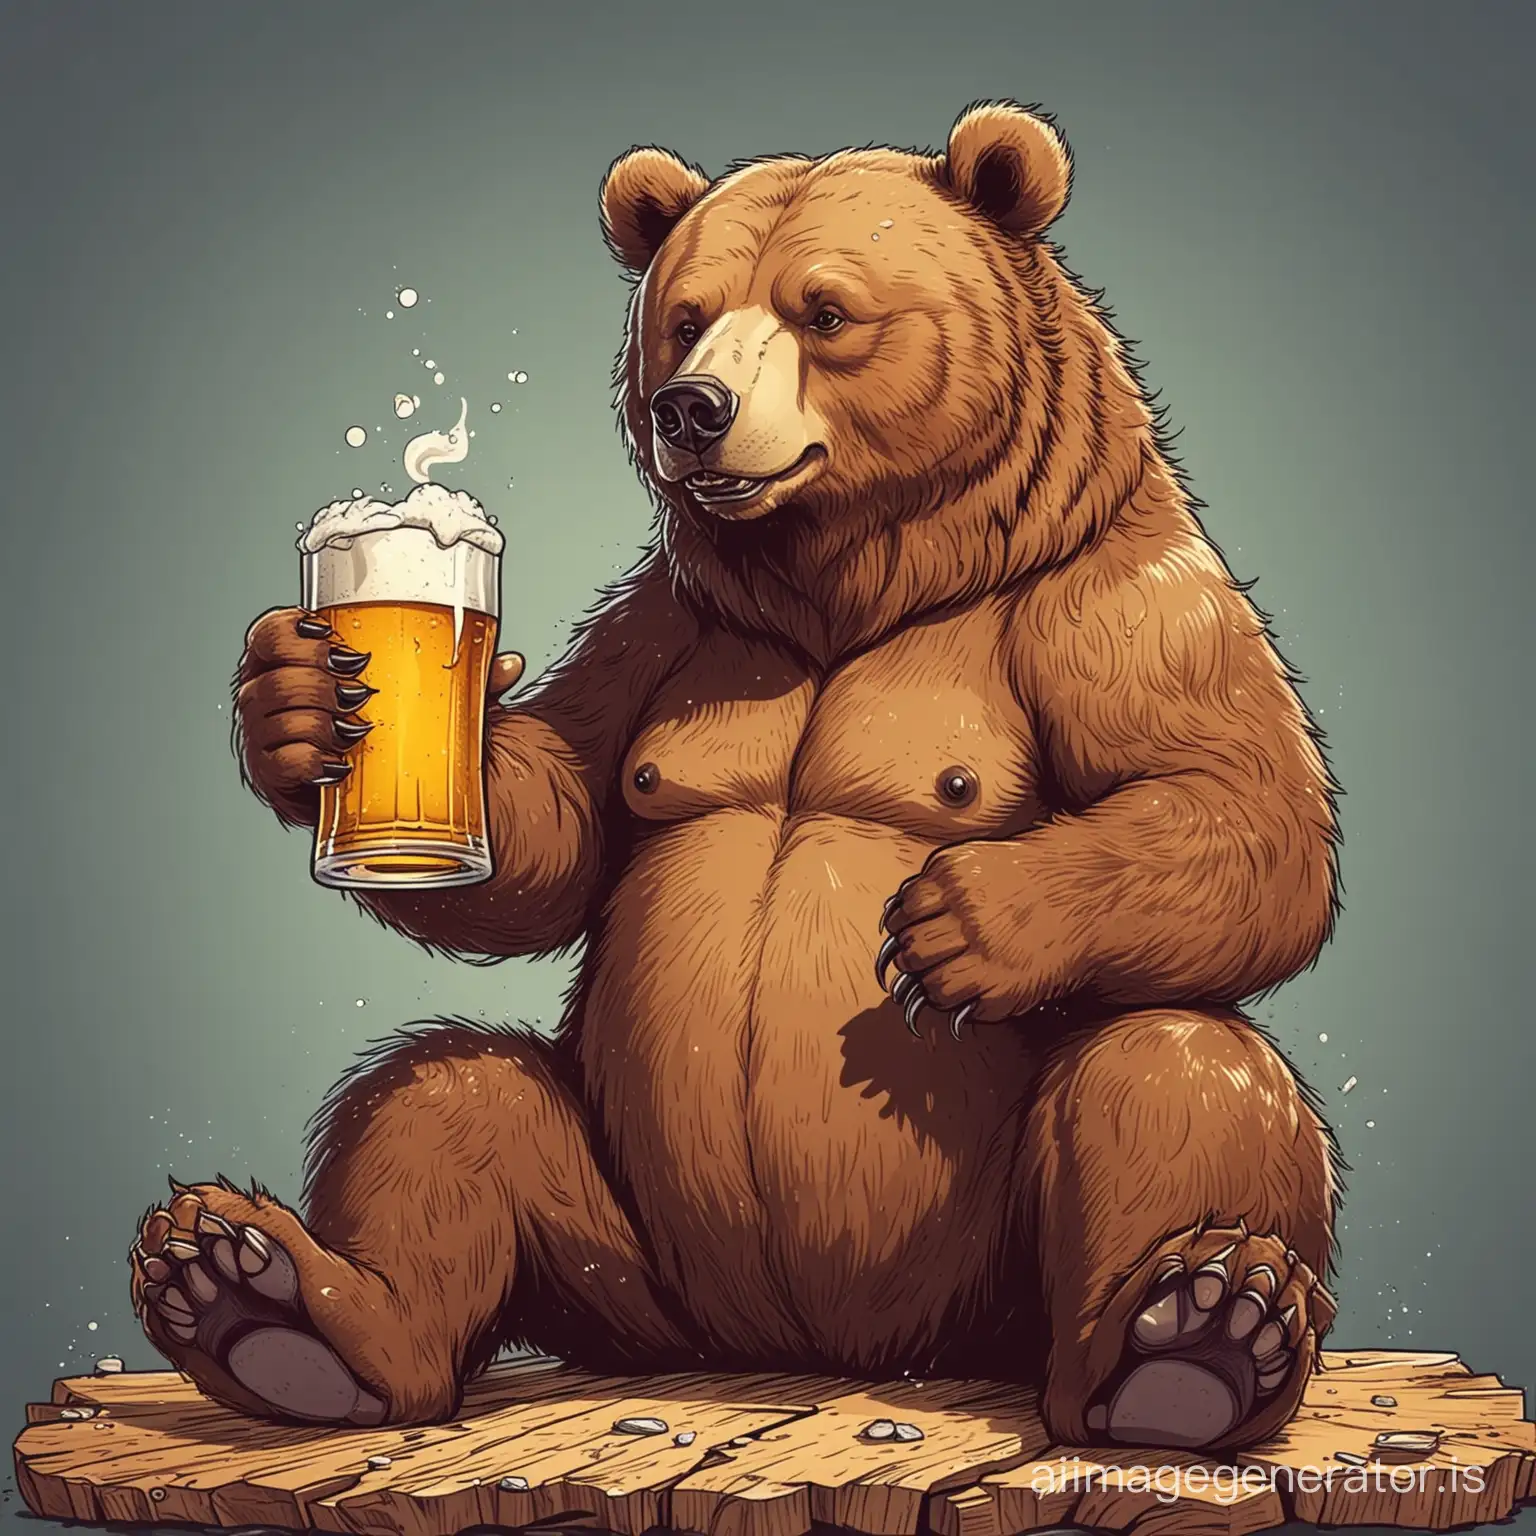 A bear drinking a beer in comic style